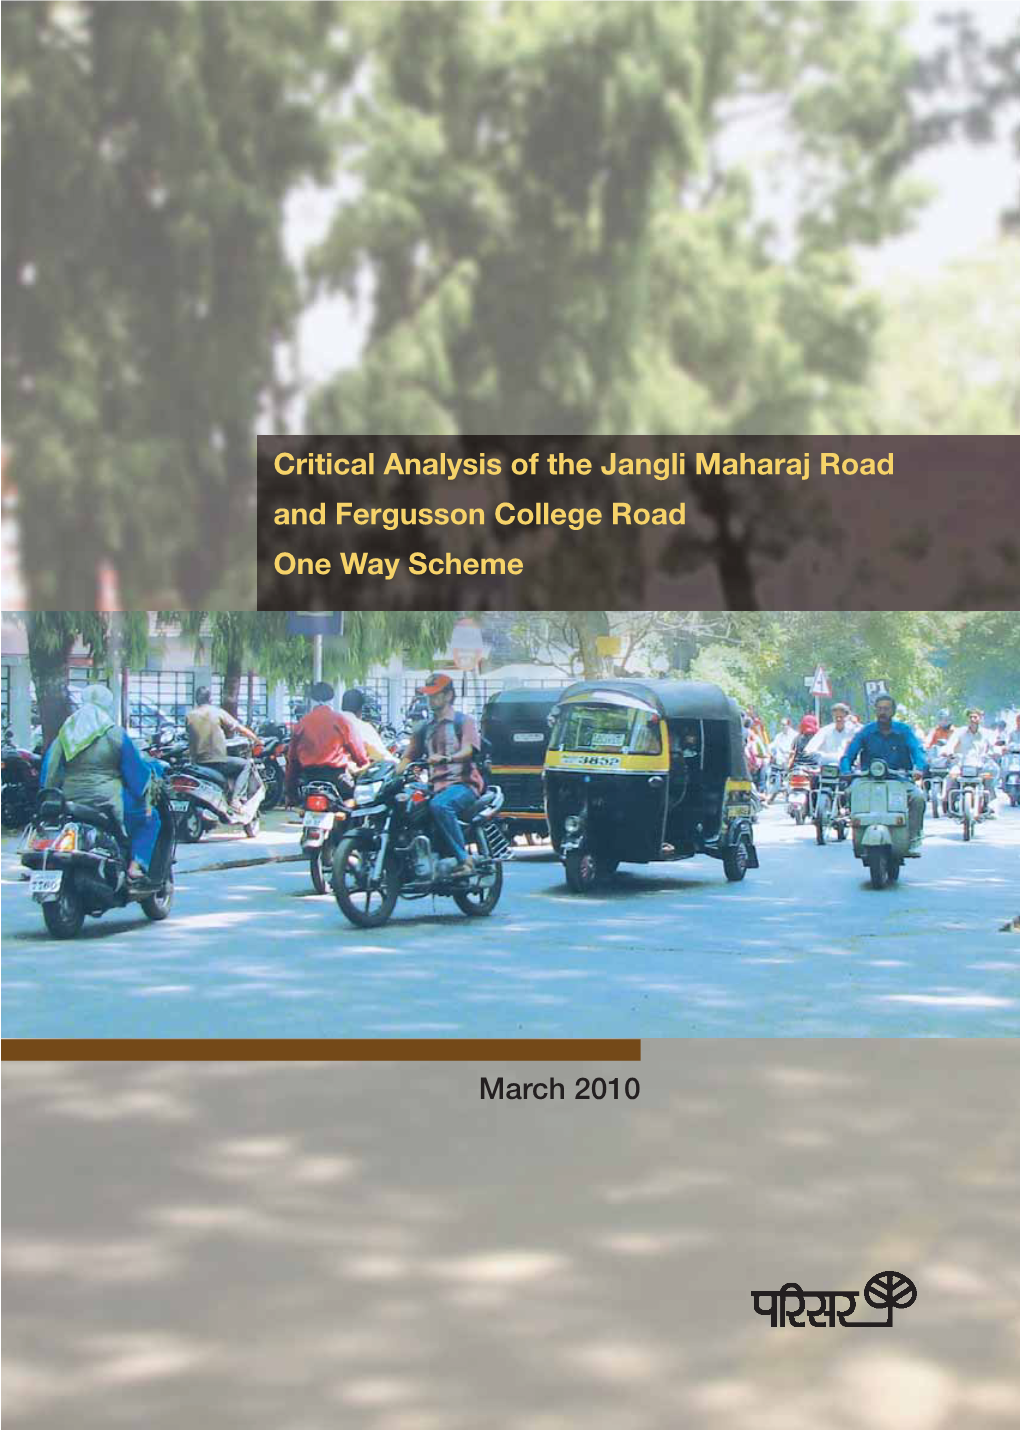 Critical Analysis of the Jangli Maharaj Road and Fergusson College Road One Way Scheme